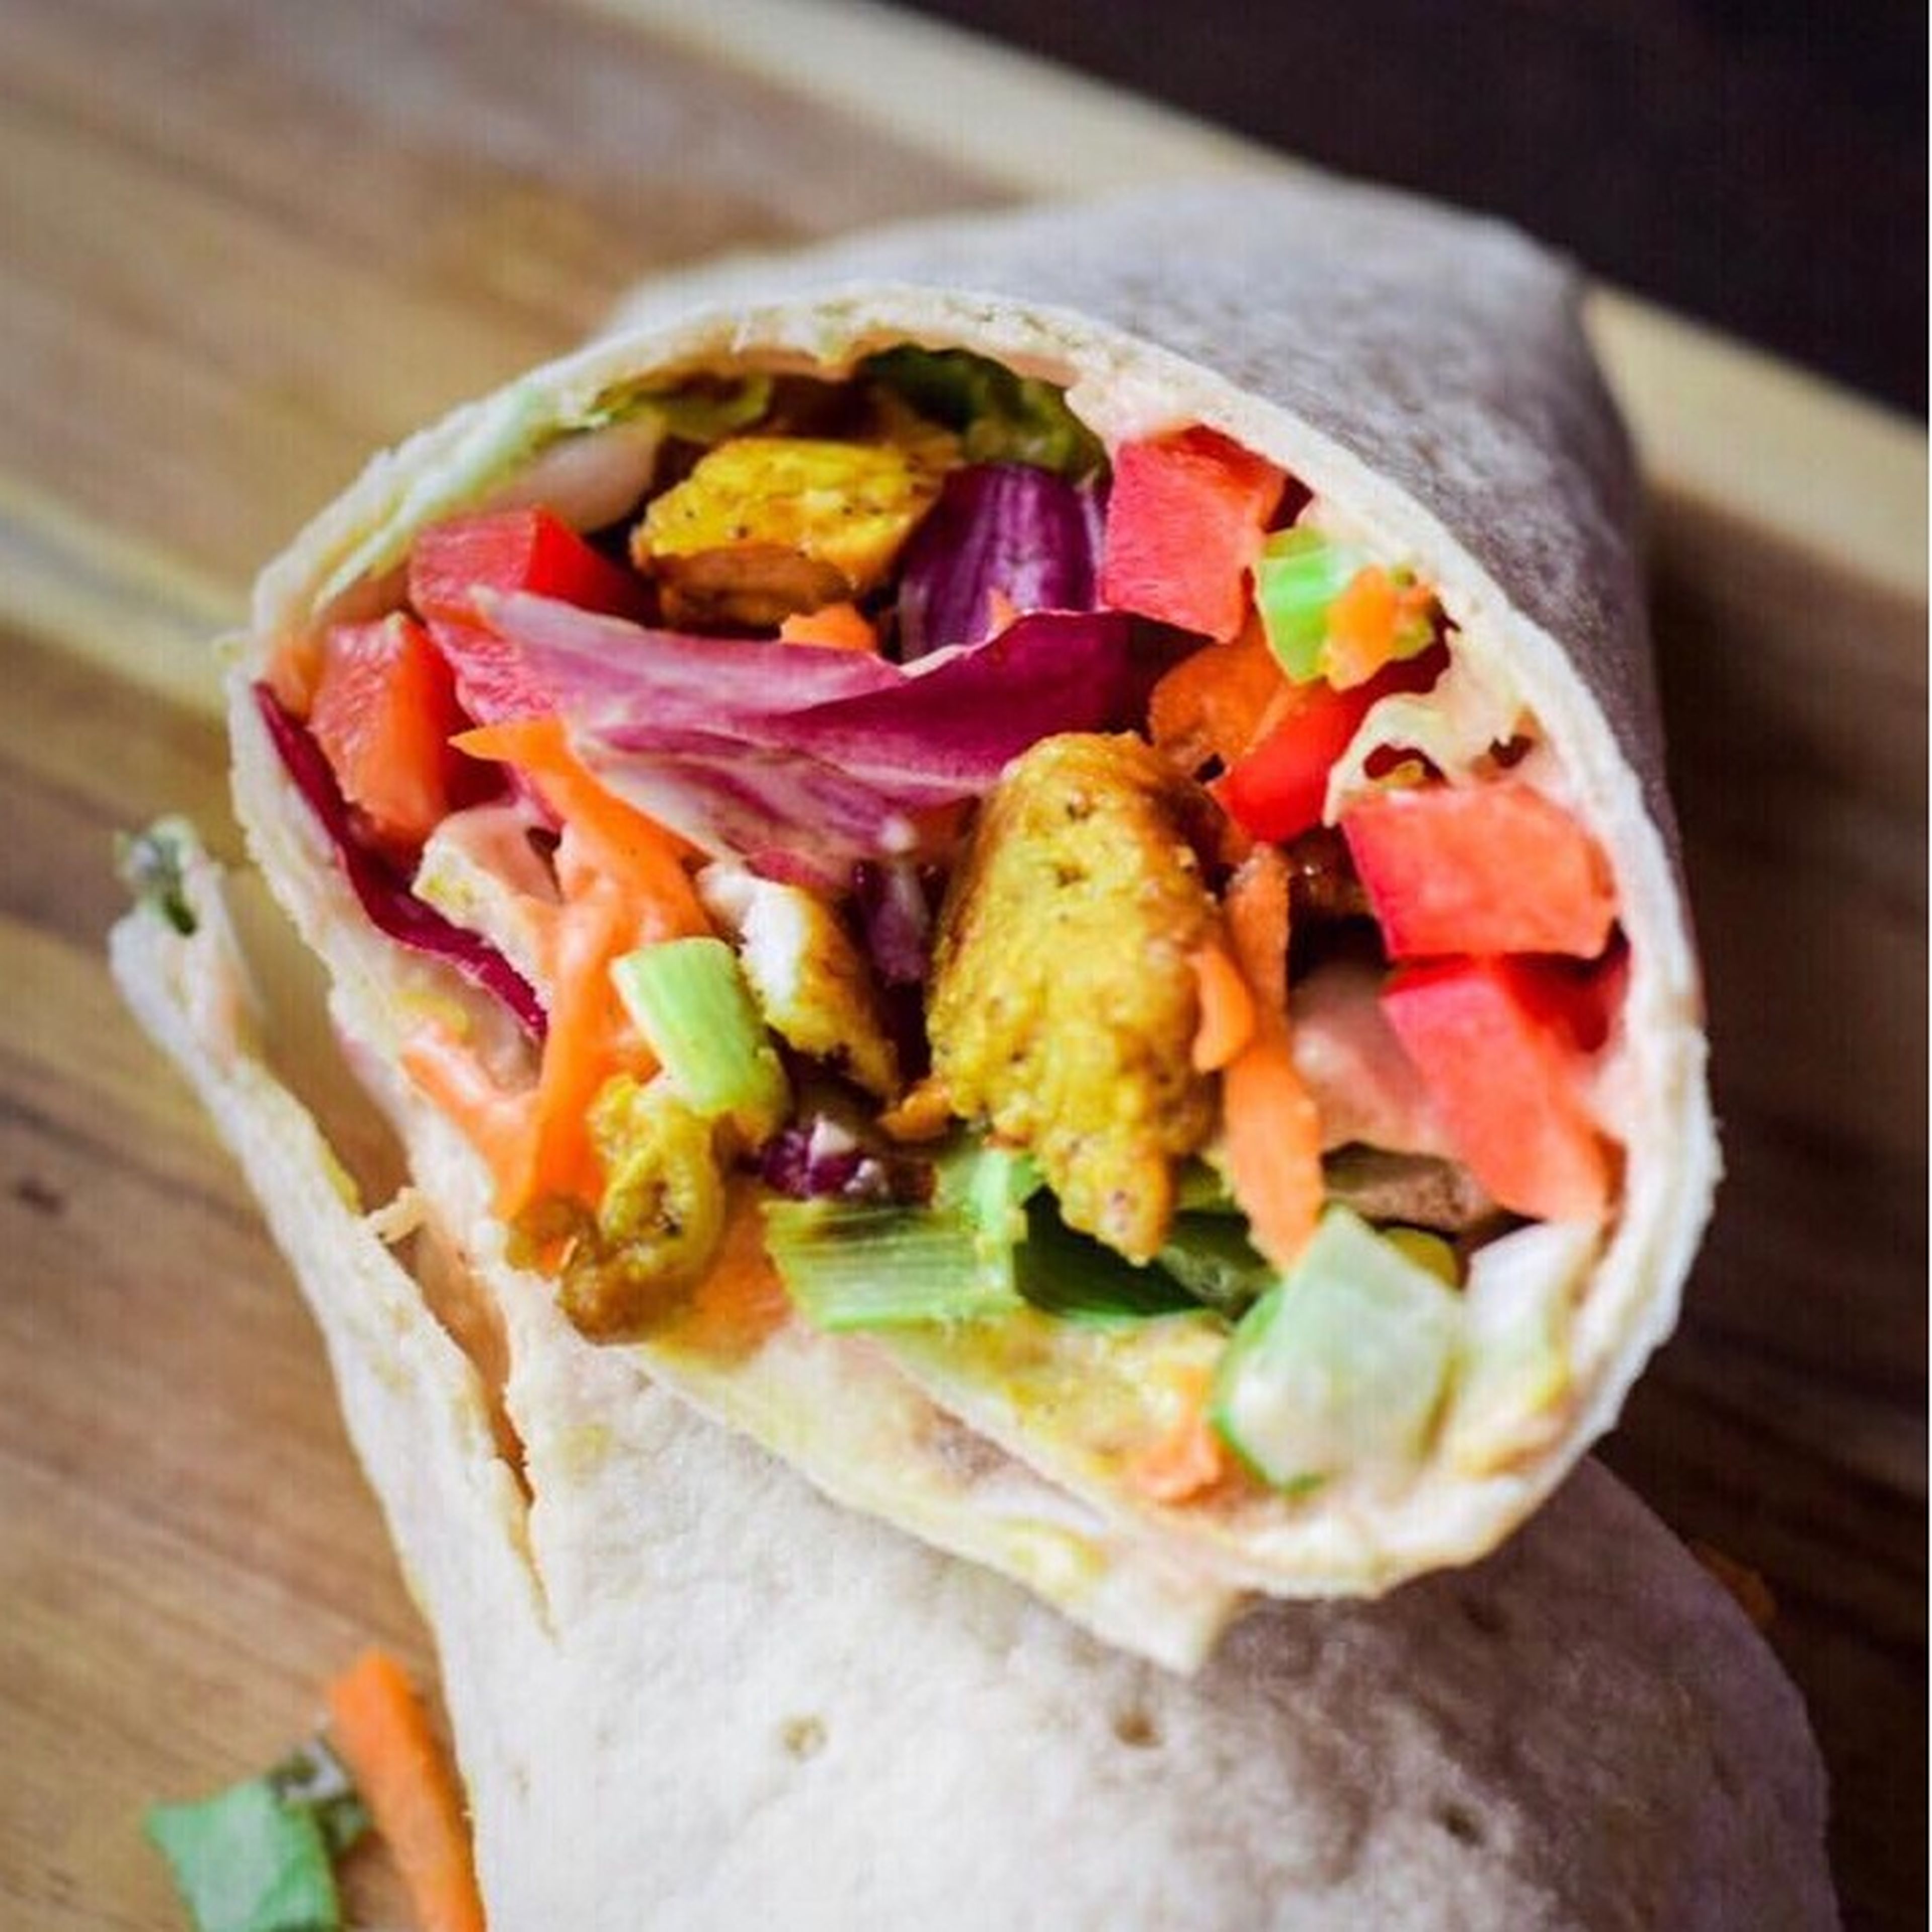 Chicken and vegetable wrap